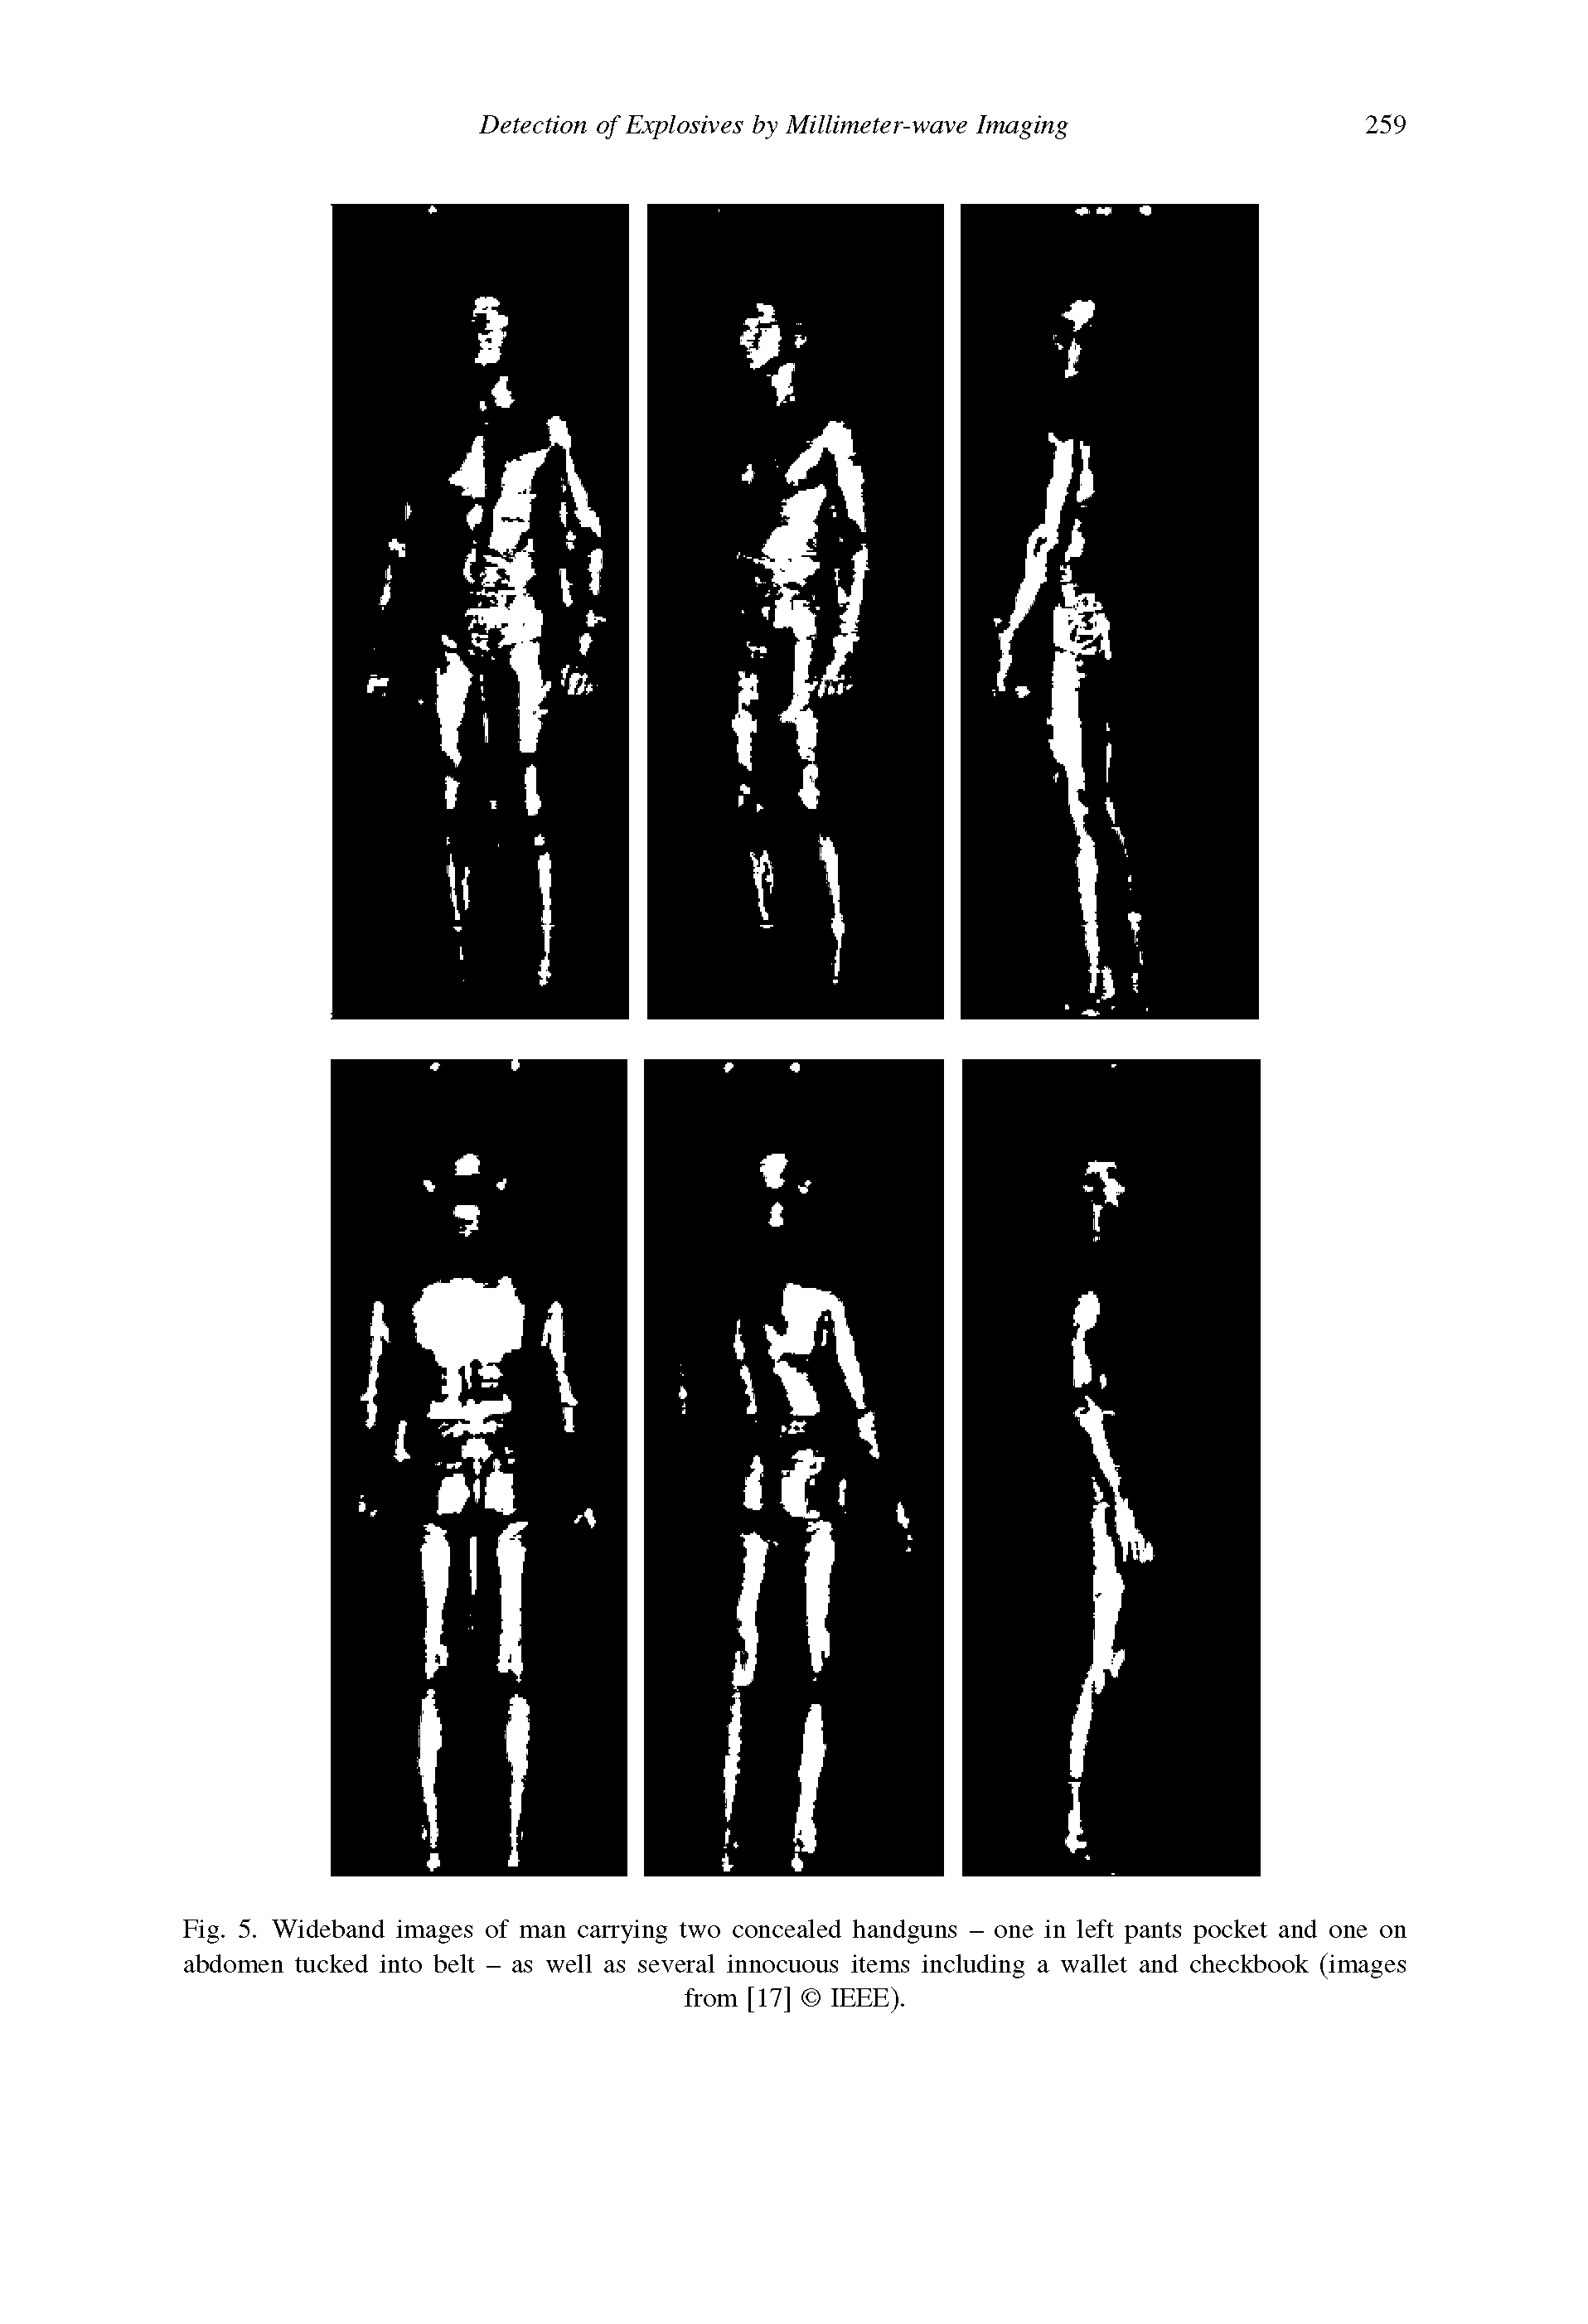 Fig. 5. Wideband images of man carrying two concealed handguns - one in left pants pocket and one on abdomen tucked into belt - as well as several innocuous items including a wallet and checkbook (images...